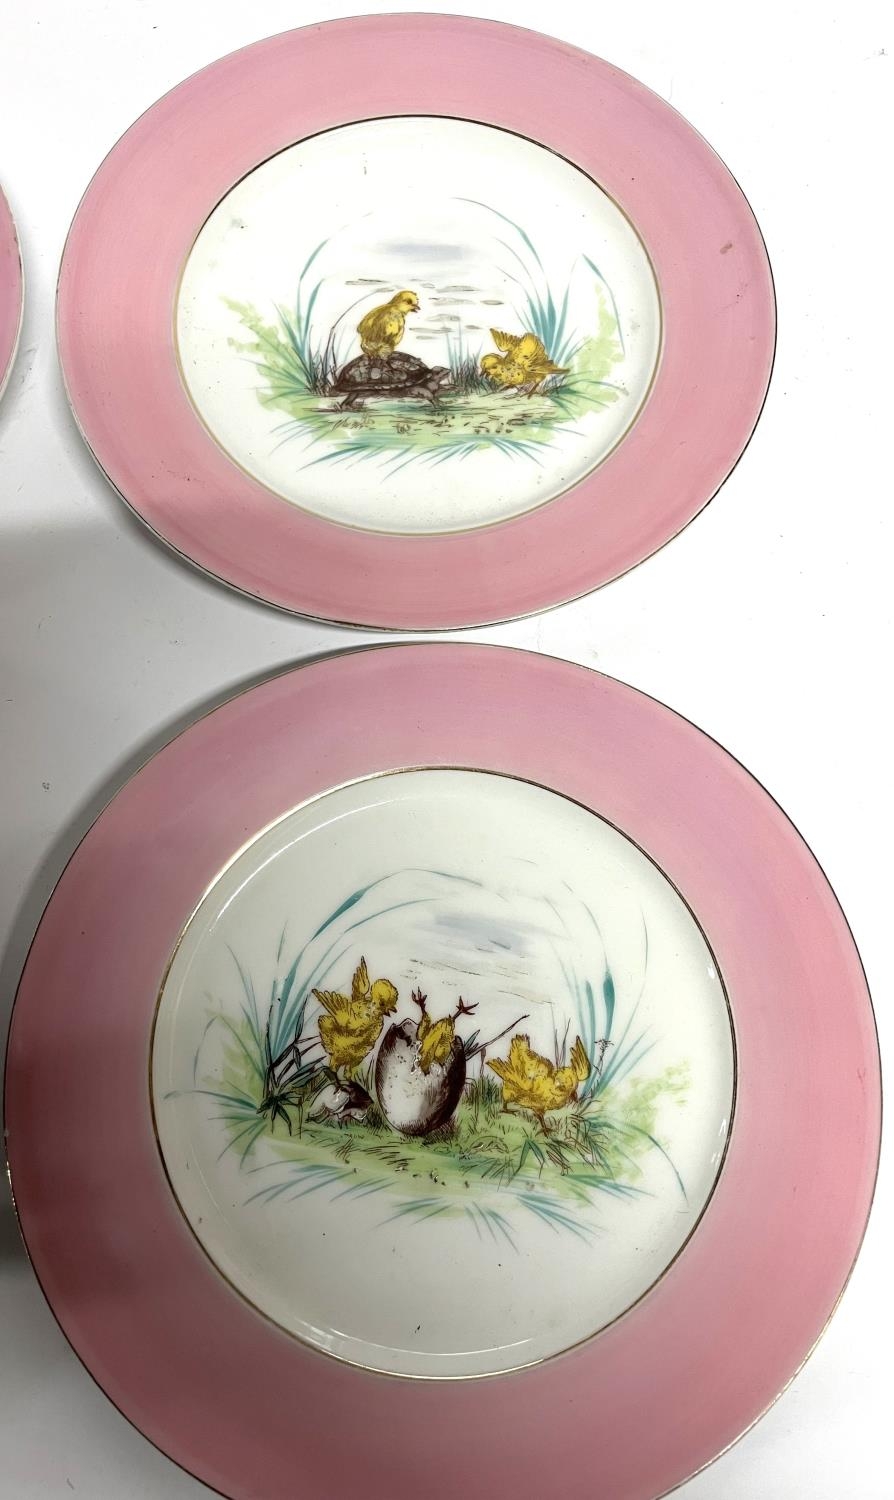 Six Victorian hand-painted plates depicting scenes featuring a newly hatched Chick and a Frog (6) - Image 3 of 3